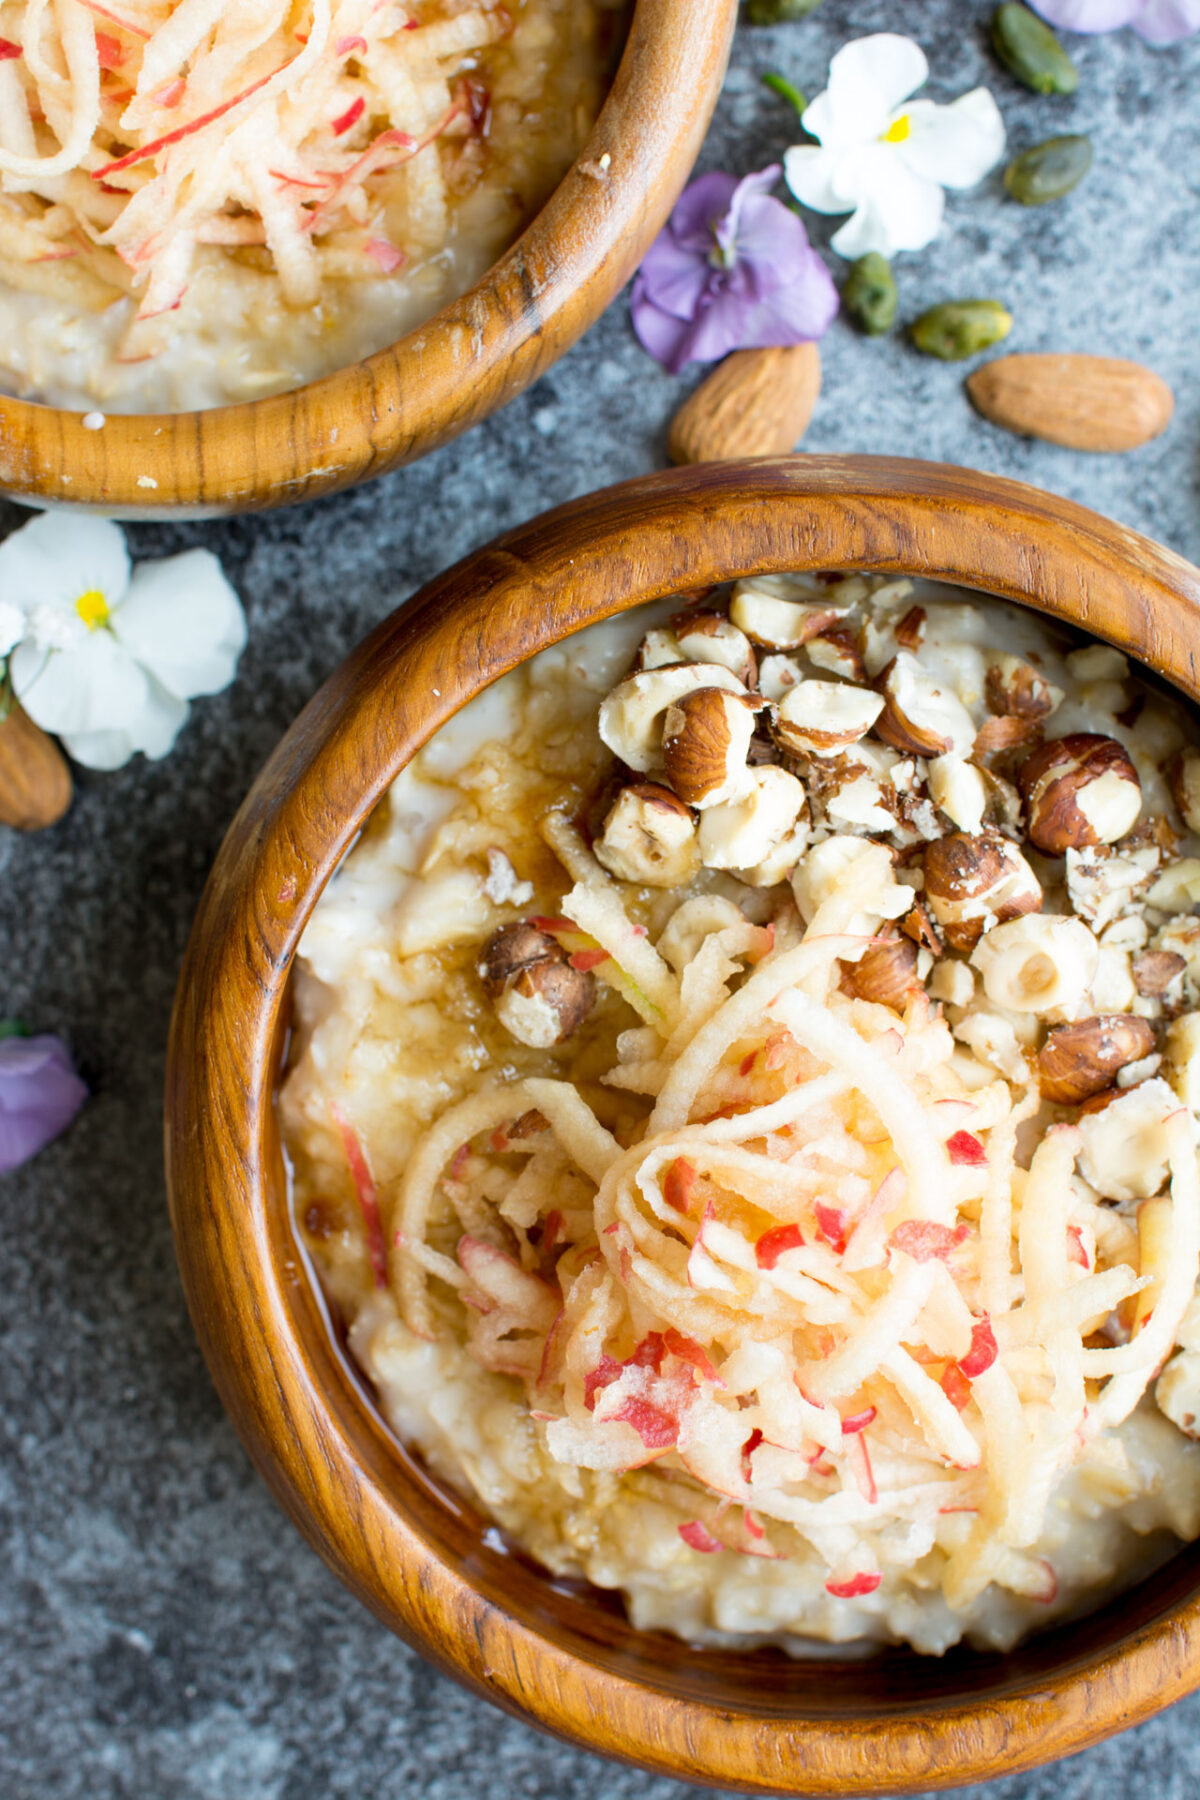 a close-up view image showcases a wooden bowl filled with creamy oatmeal, enhanced with grated apple, toasted hazelnuts, and a delicate dusting of sweet brown sugar.